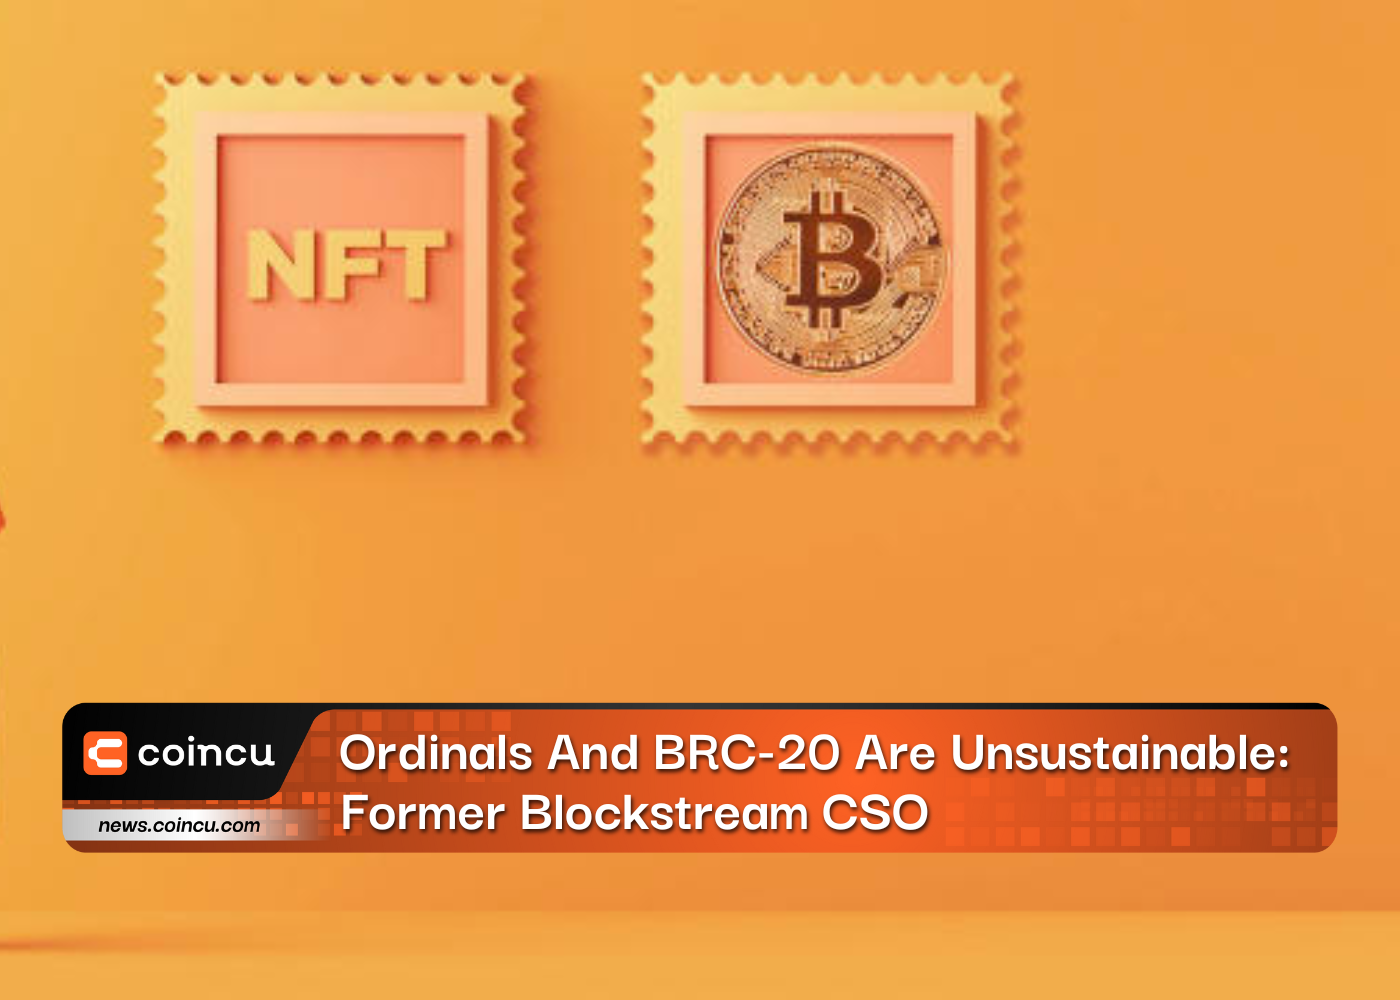 Ordinals And BRC-20 Are Unsustainable: Former Blockstream CSO